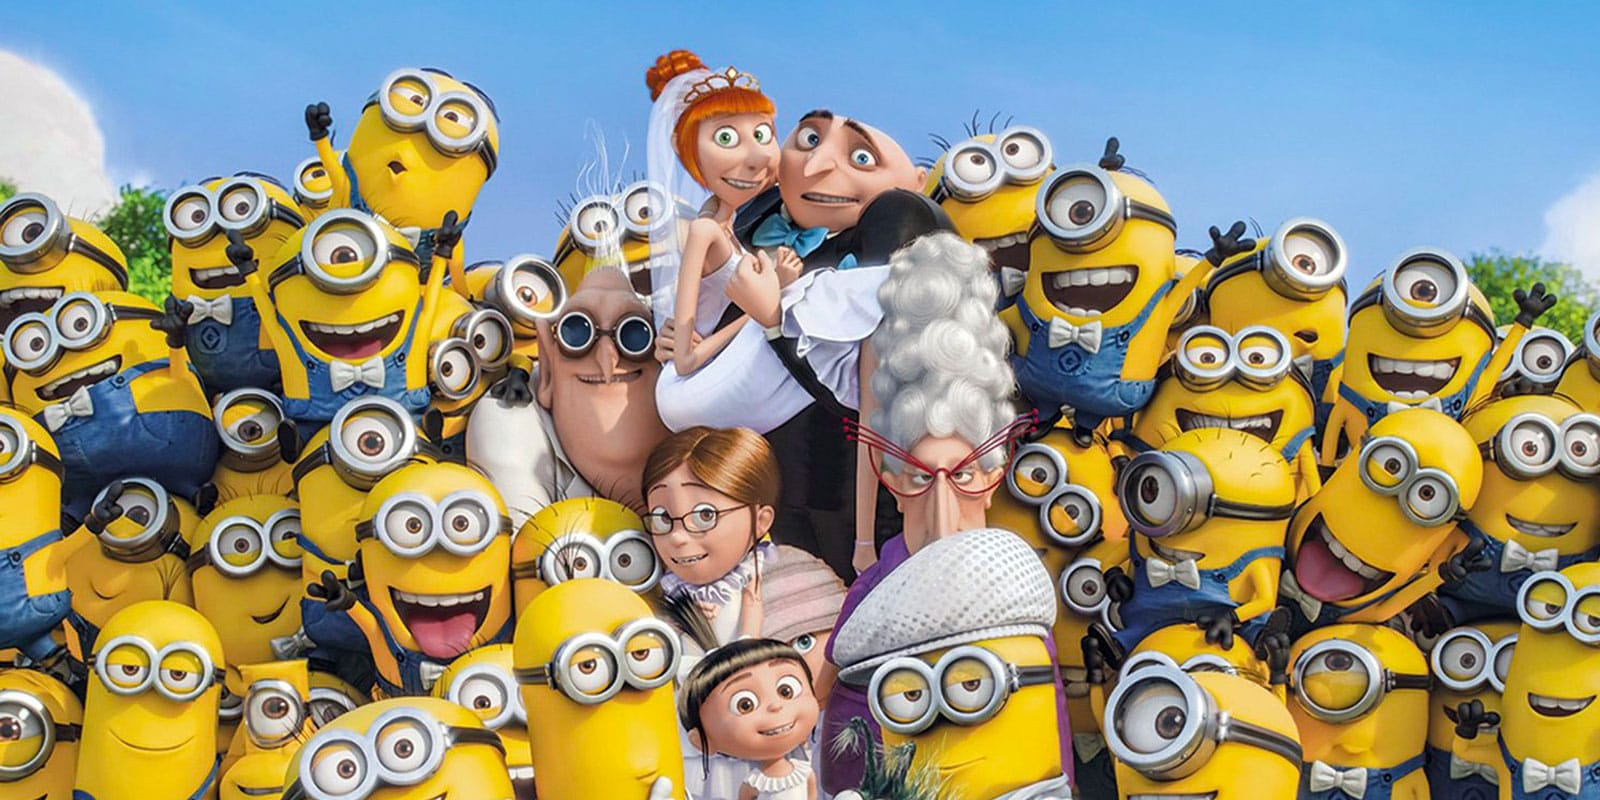 despicable me 2 costumes